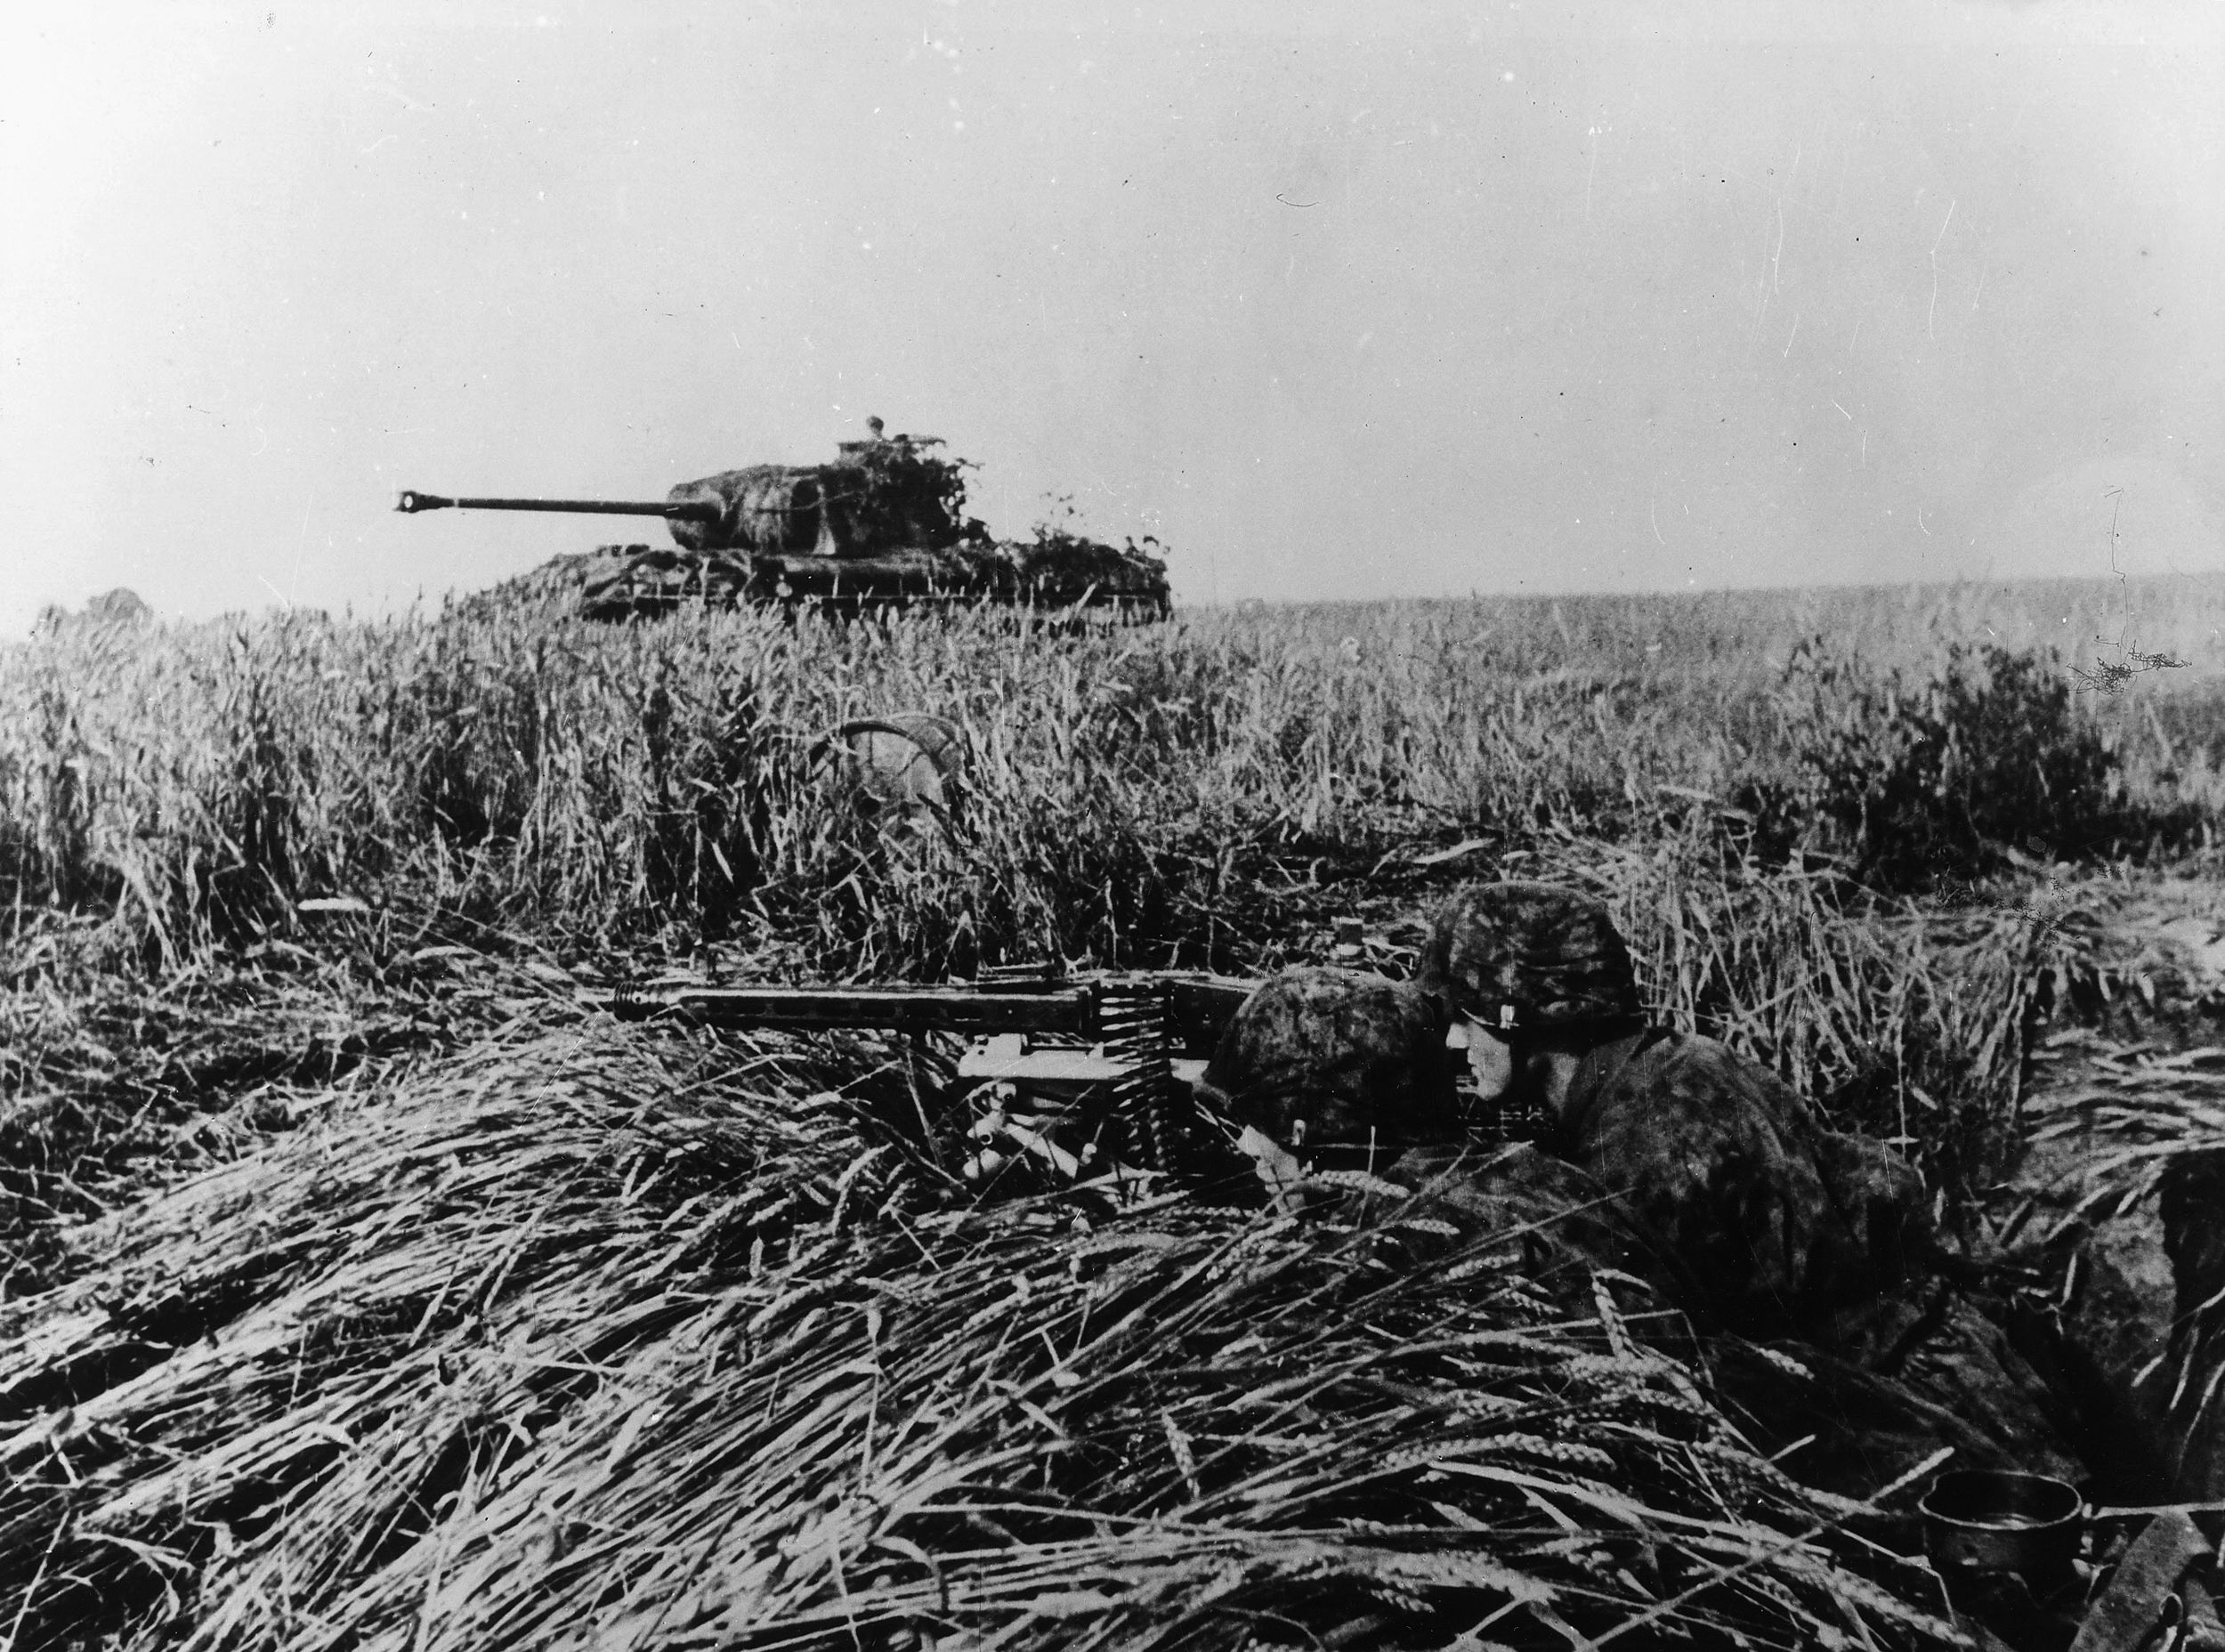 Supported by a Panther medium tank, a pair of SS panzergrenadiers man a well-camouflaged machine-gun position and await an Allied attack. This photo was taken in July 1944. 